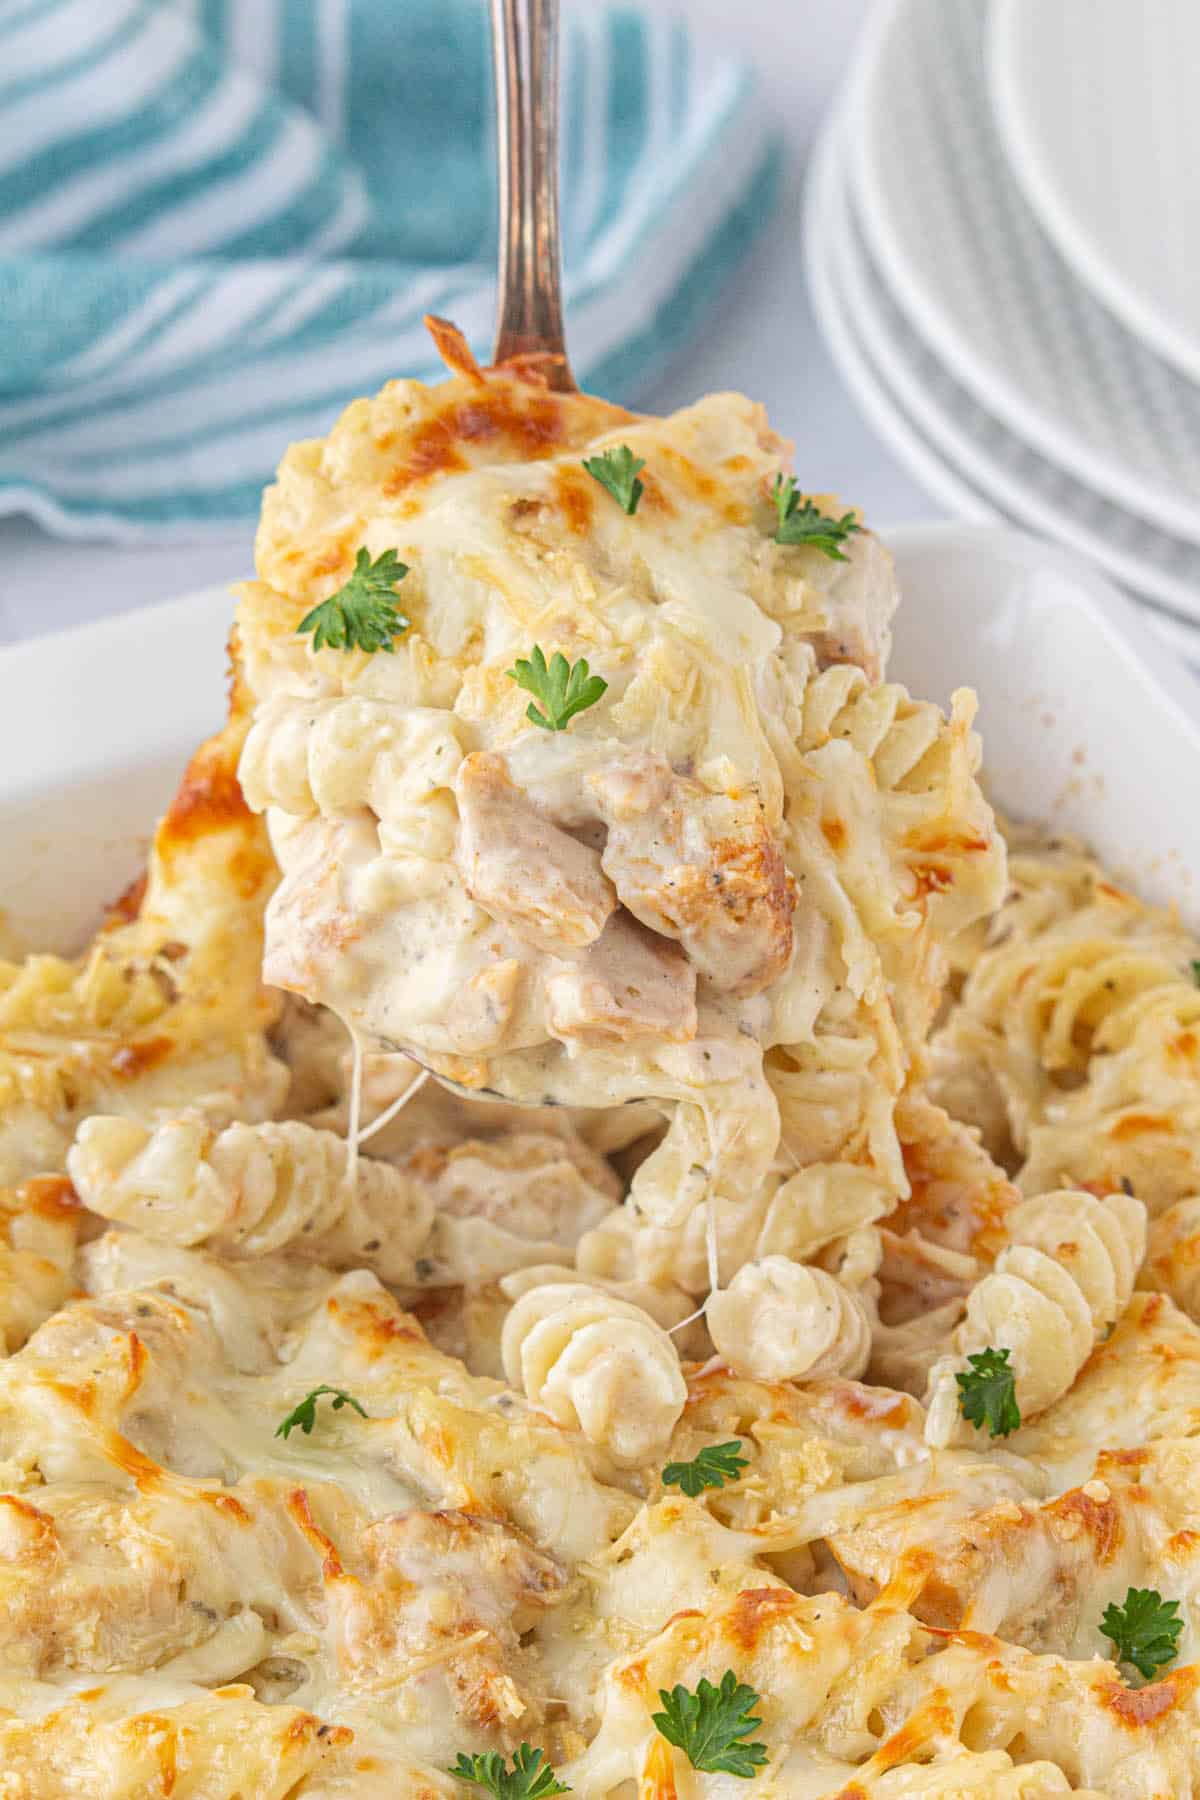 Saucy Garlic Parmesan Chicken Pasta Bake in a casserole dish with a serving spoon scooping up a serving.